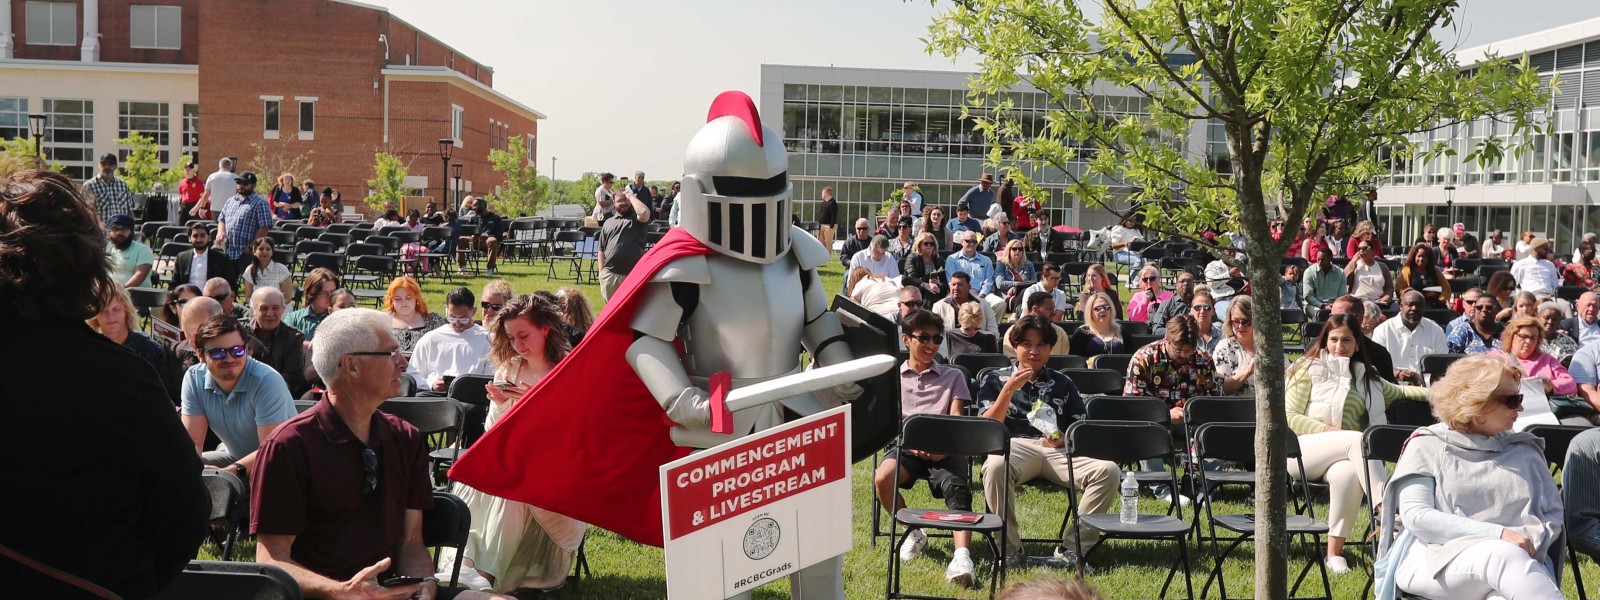 Barry mascot on the quad for commencement